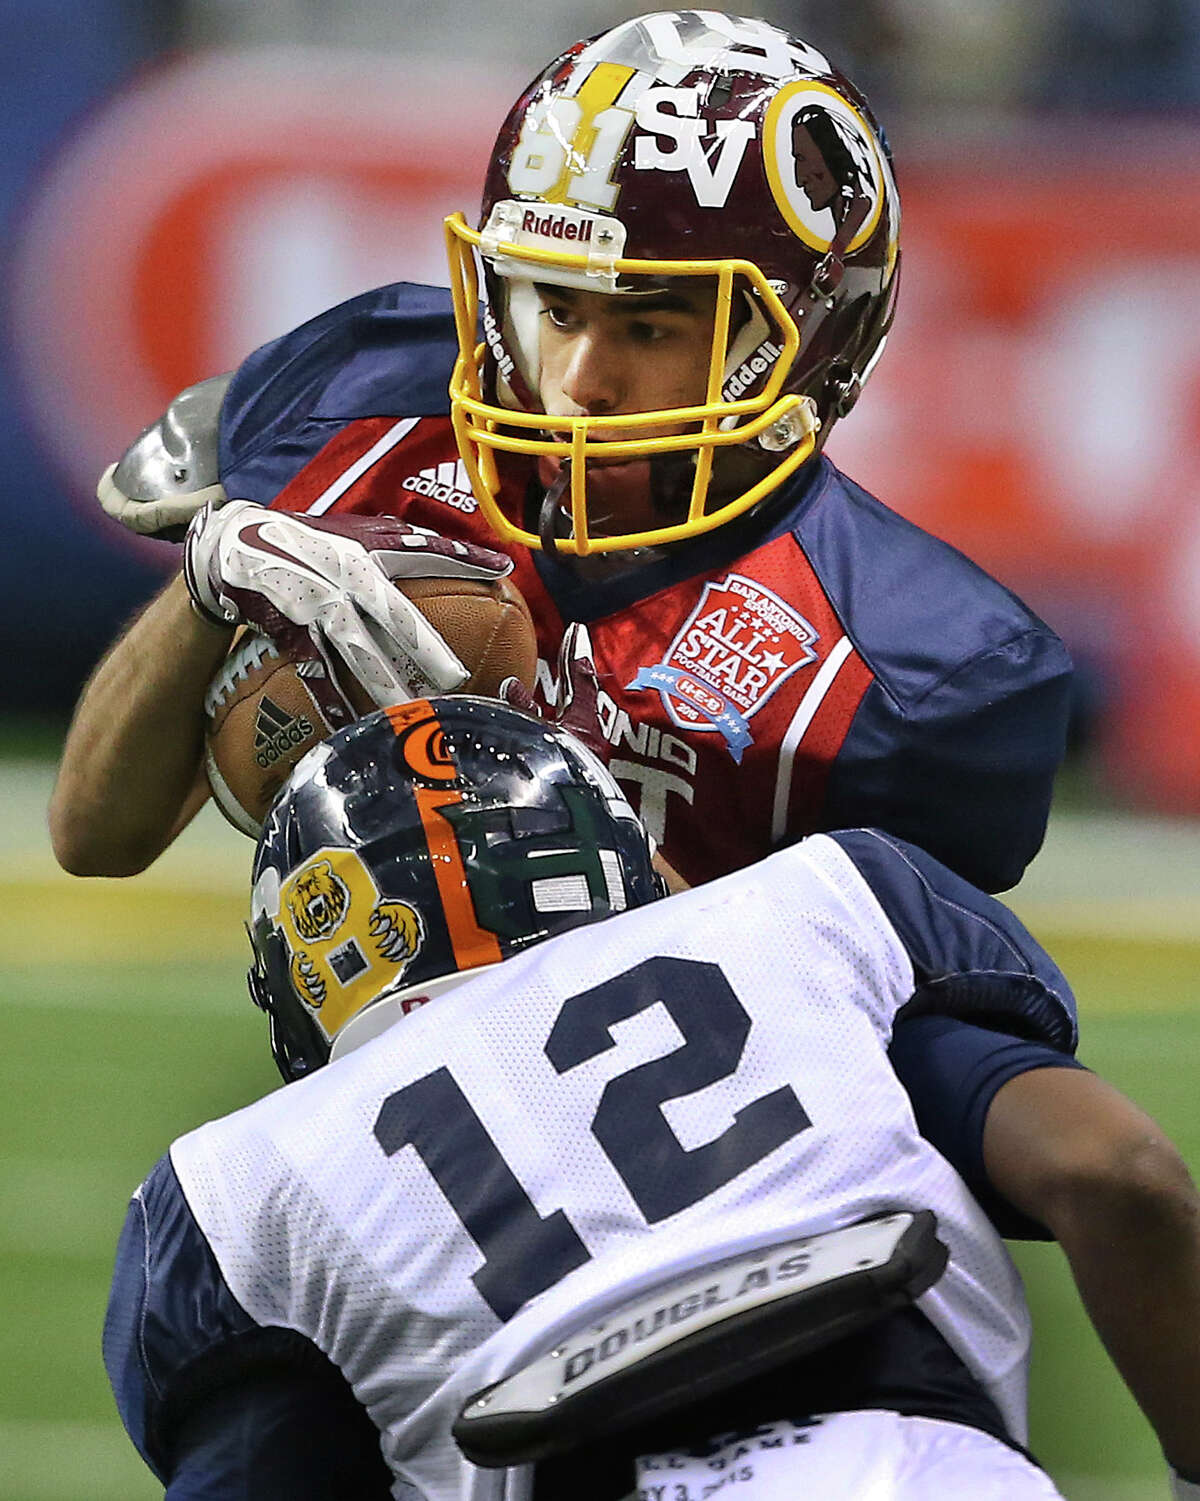 Ian Martinez (Harlandale) rakes in a pass for the East in front of Kadarius Lee (Brandeis) at the San Antonio All Star Game at the Alamodome on December 3, 2015.